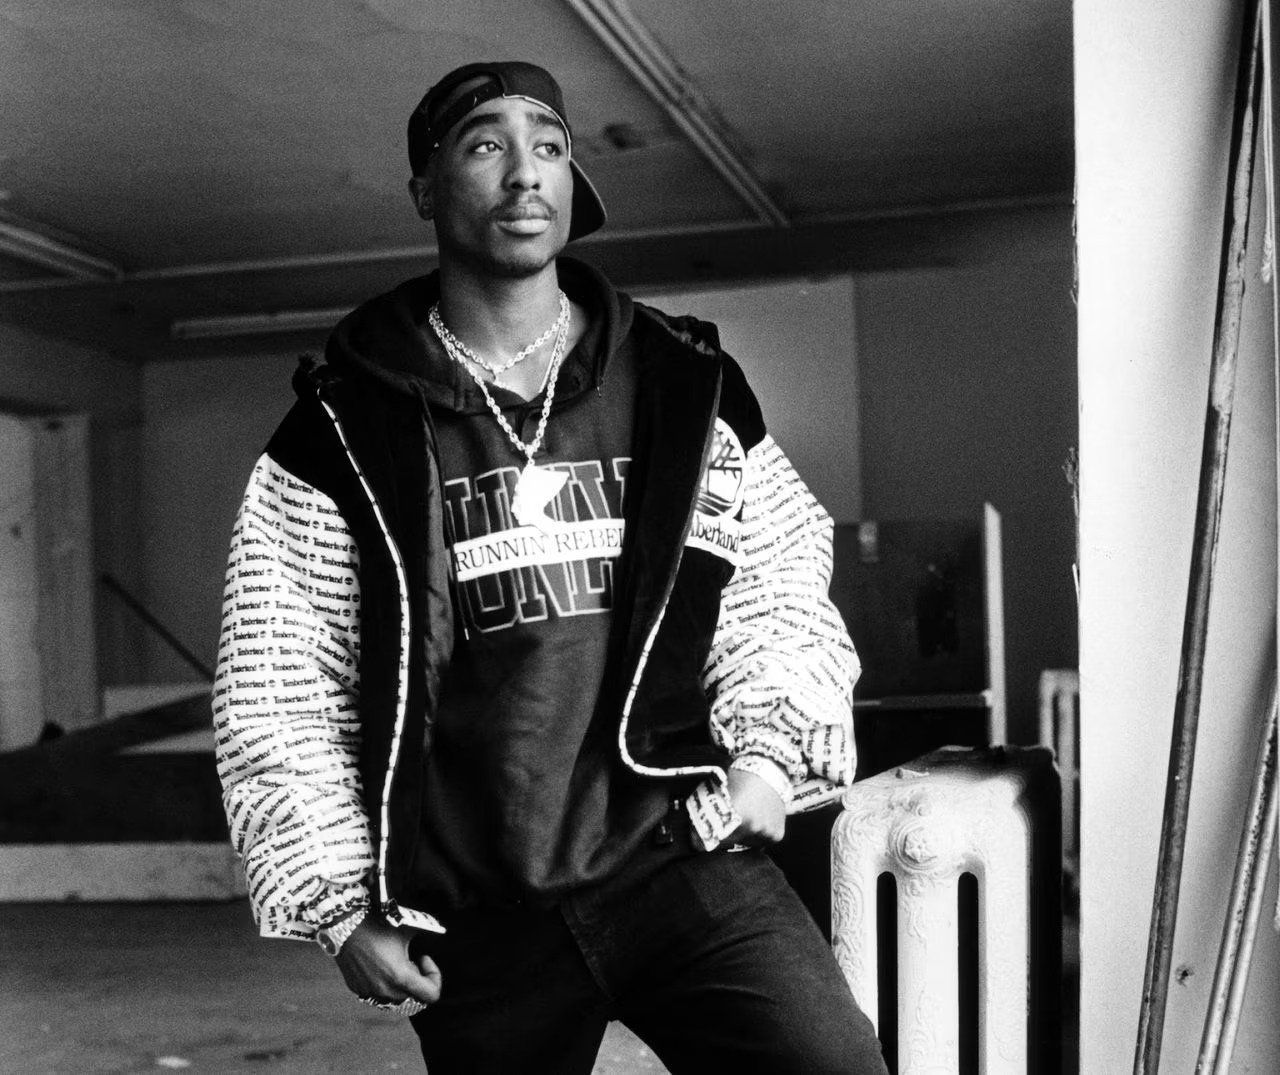 Four Unreleased Records Are Reportedly About To Be Released By 2pac's Estate